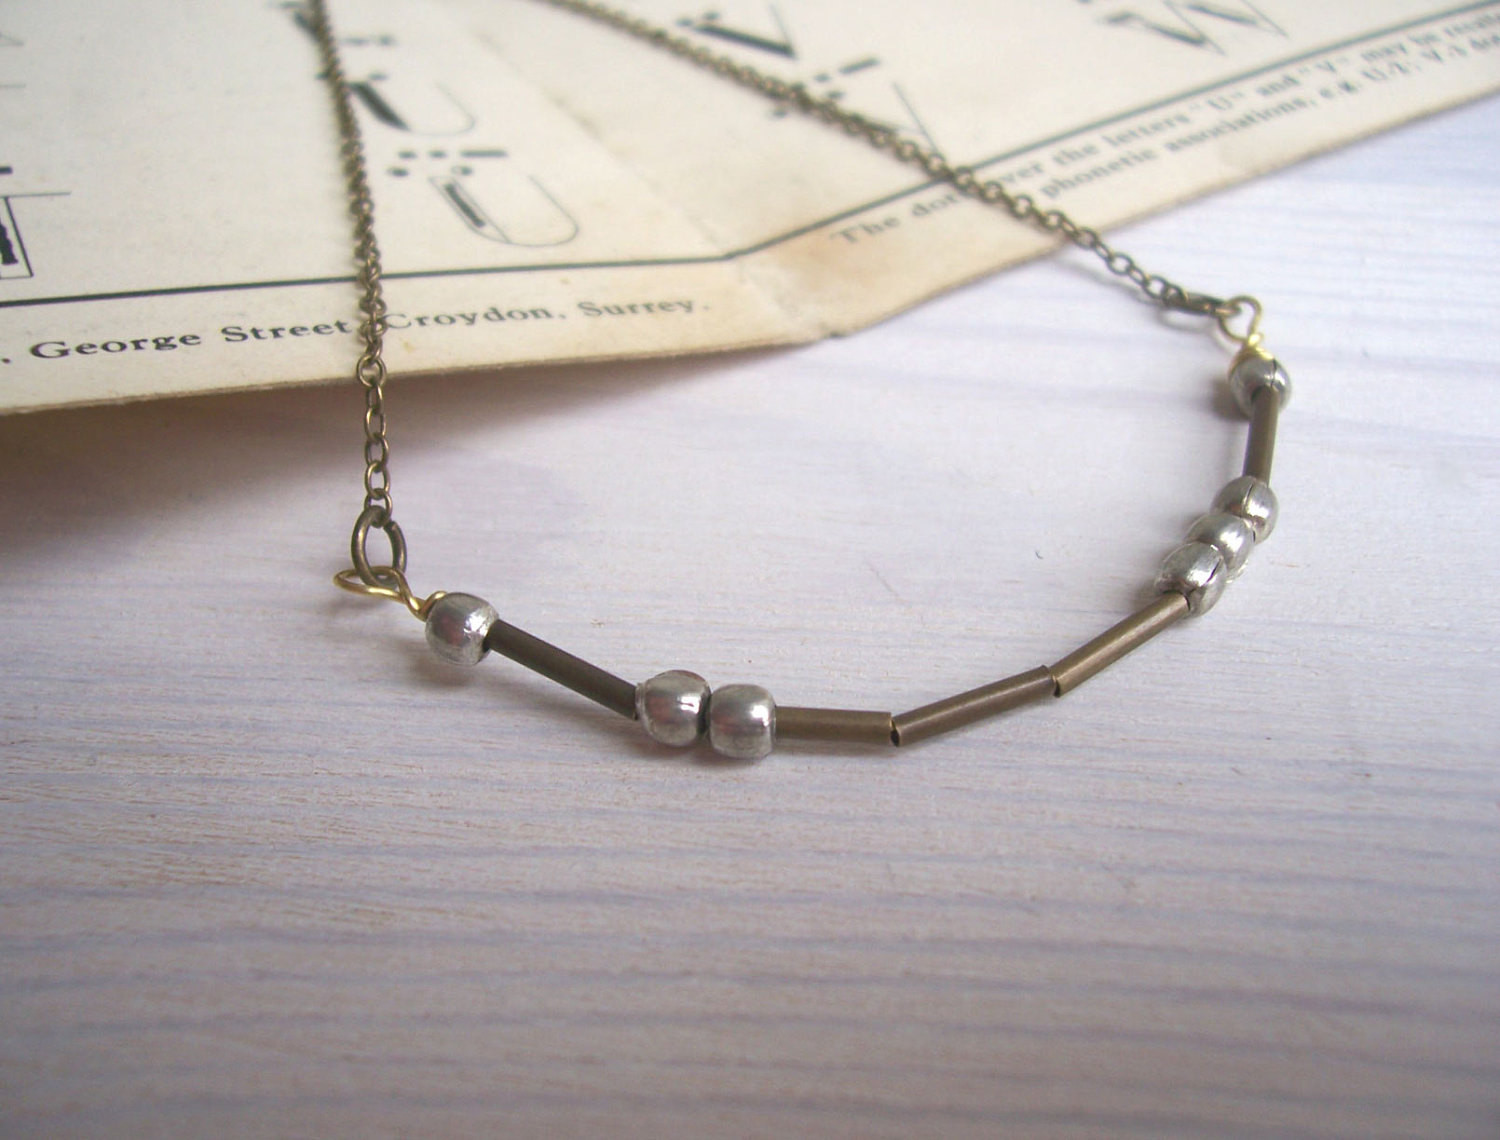 Morse Code Love Necklace
 Love Morse Code necklace mixed metals personalised message